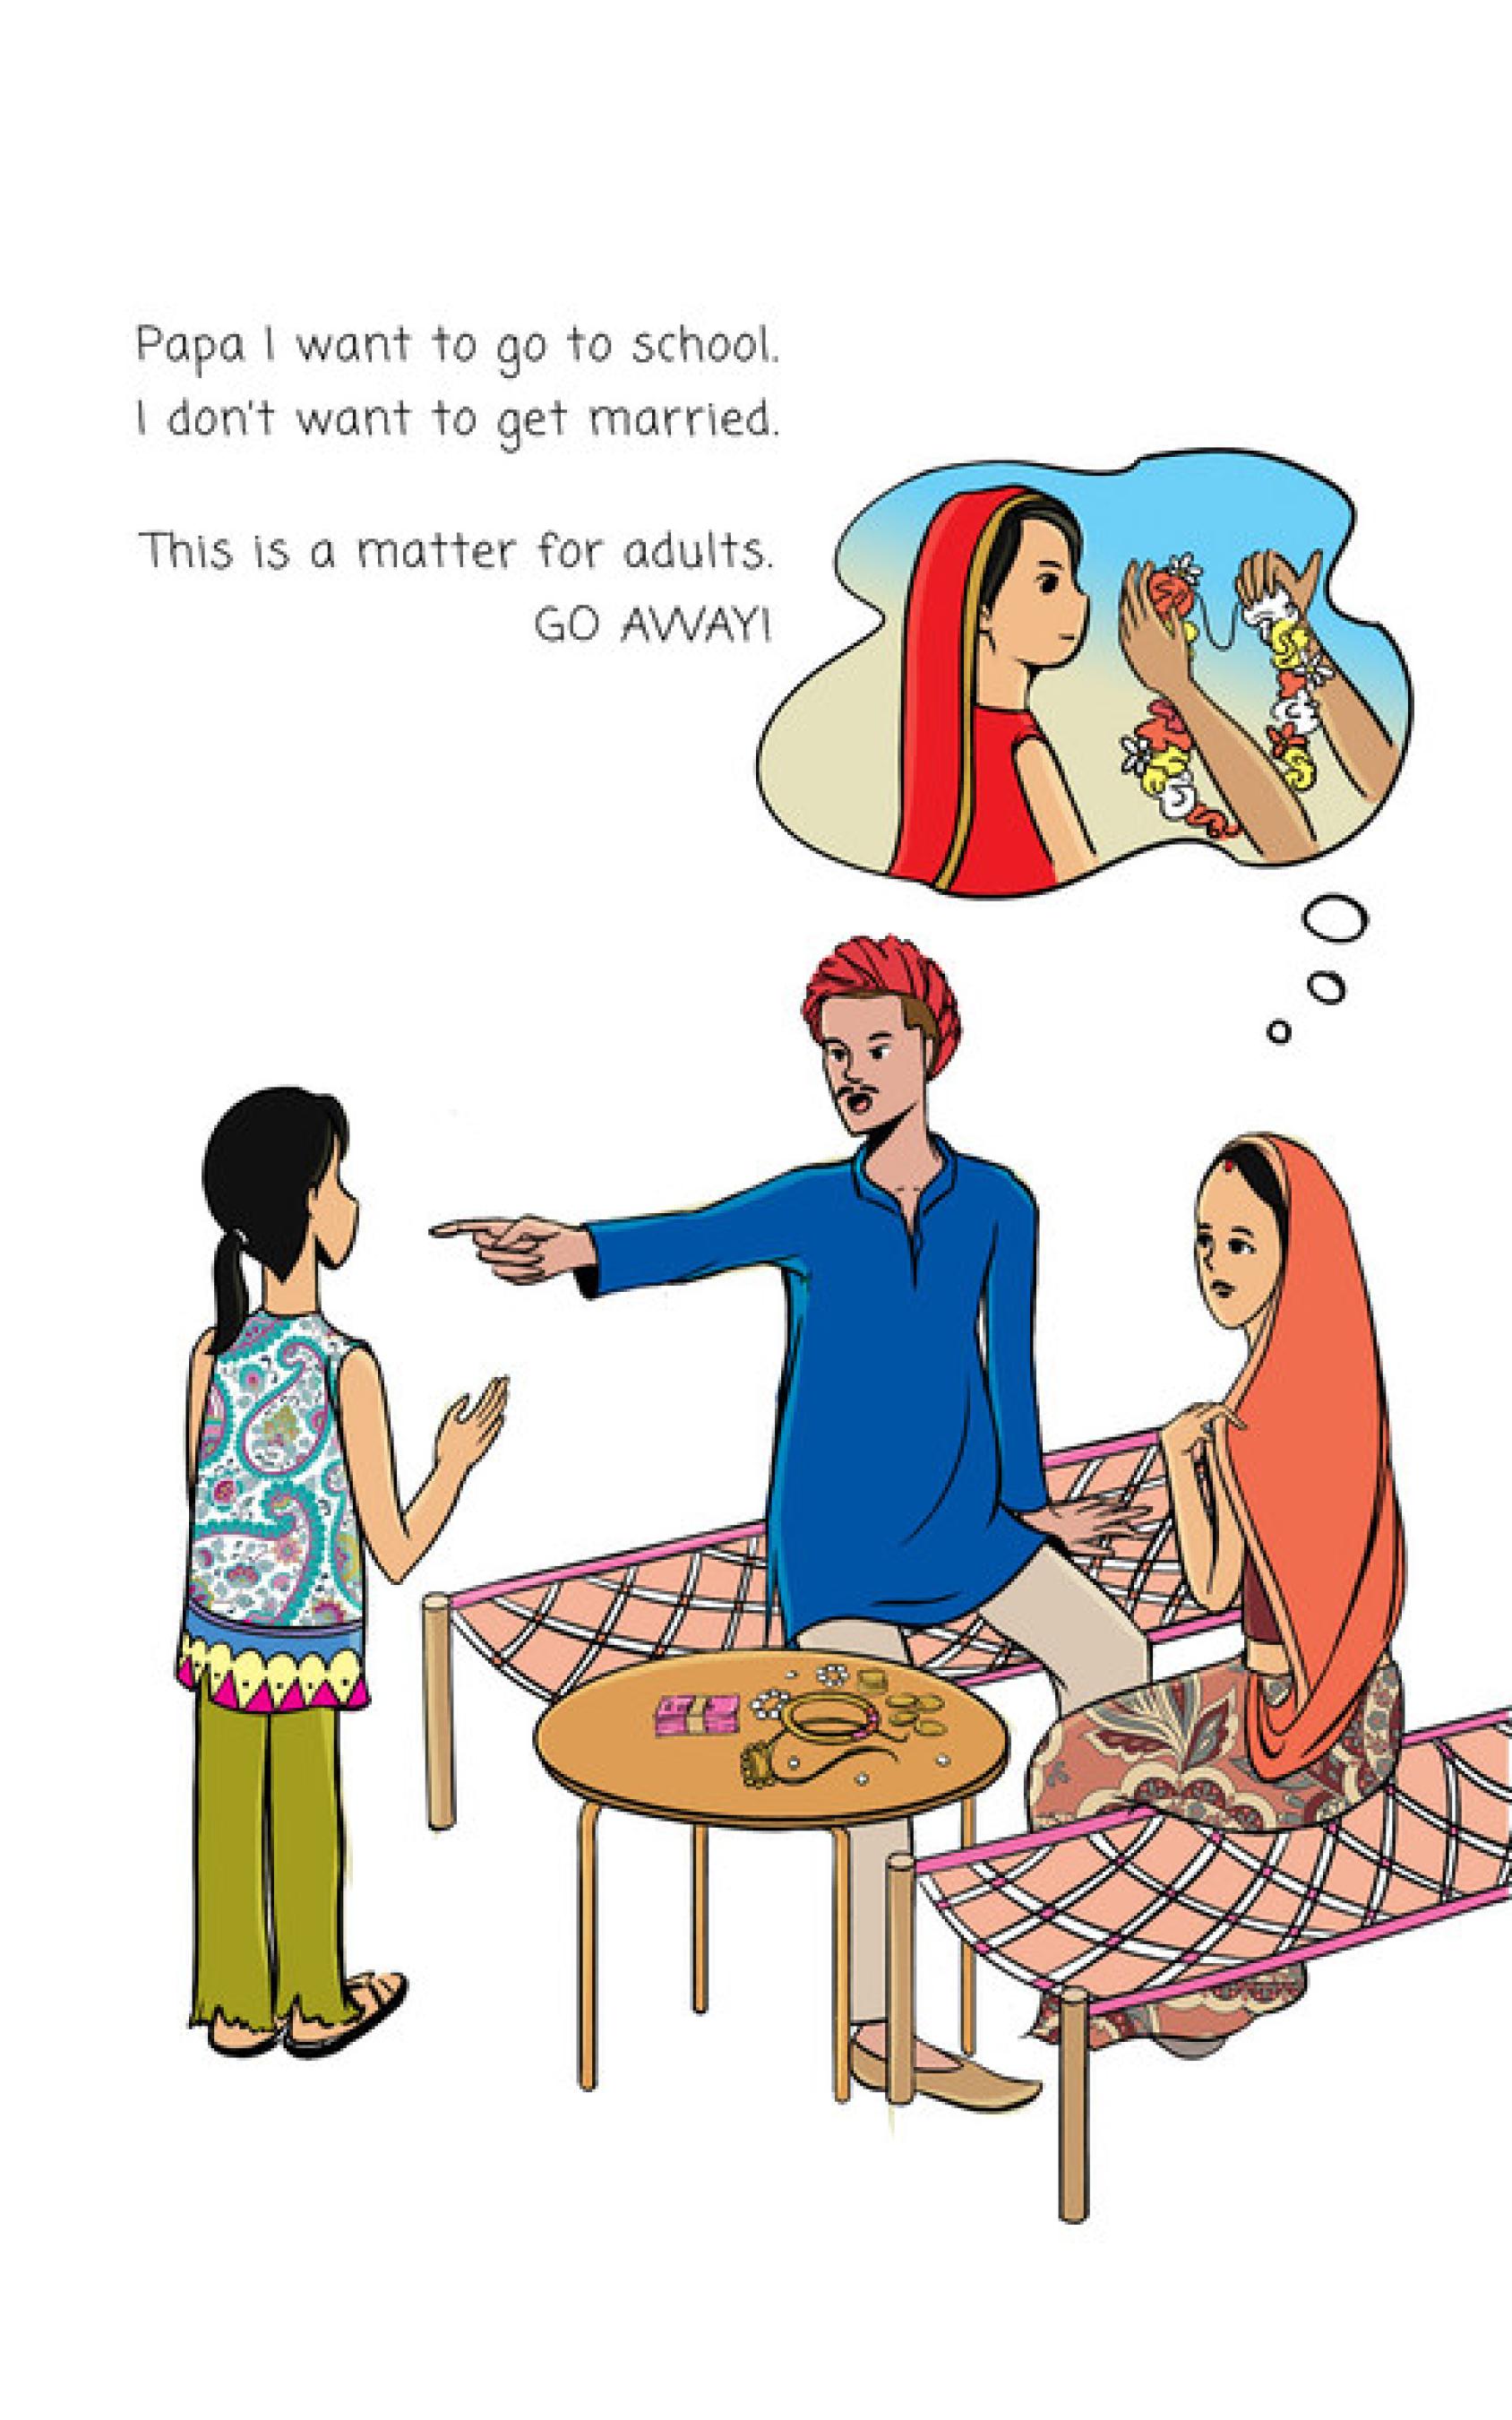 A comic picture showing an Indian family, with the father pointing his finger at the young daughter and demand her to get married, the mother listening in silence, while the girl wants to go to school.